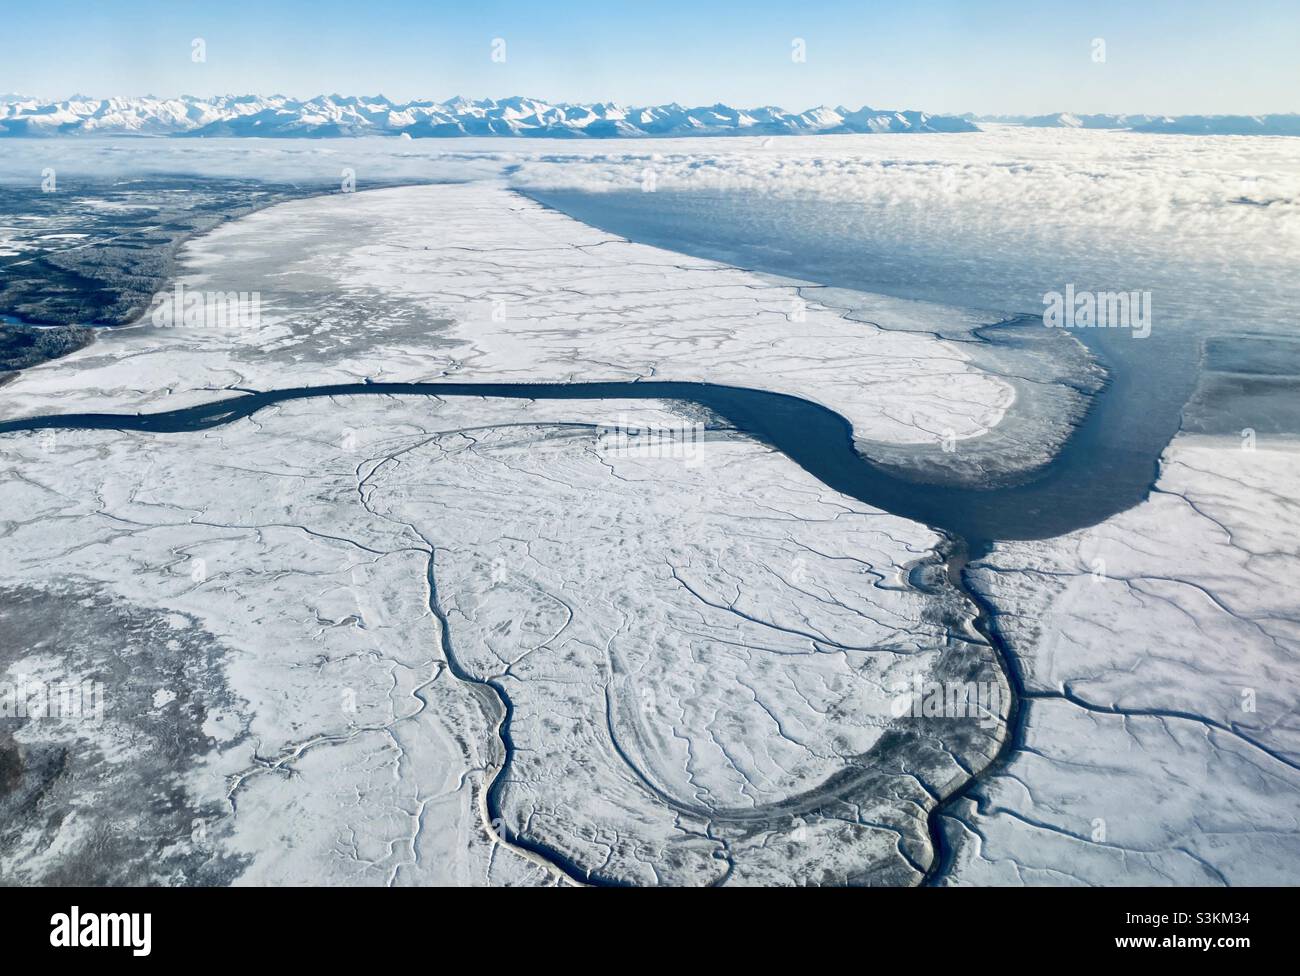 Frozen tide flats at the Cook Inlet near Anchorage, Alaska Stock Photo